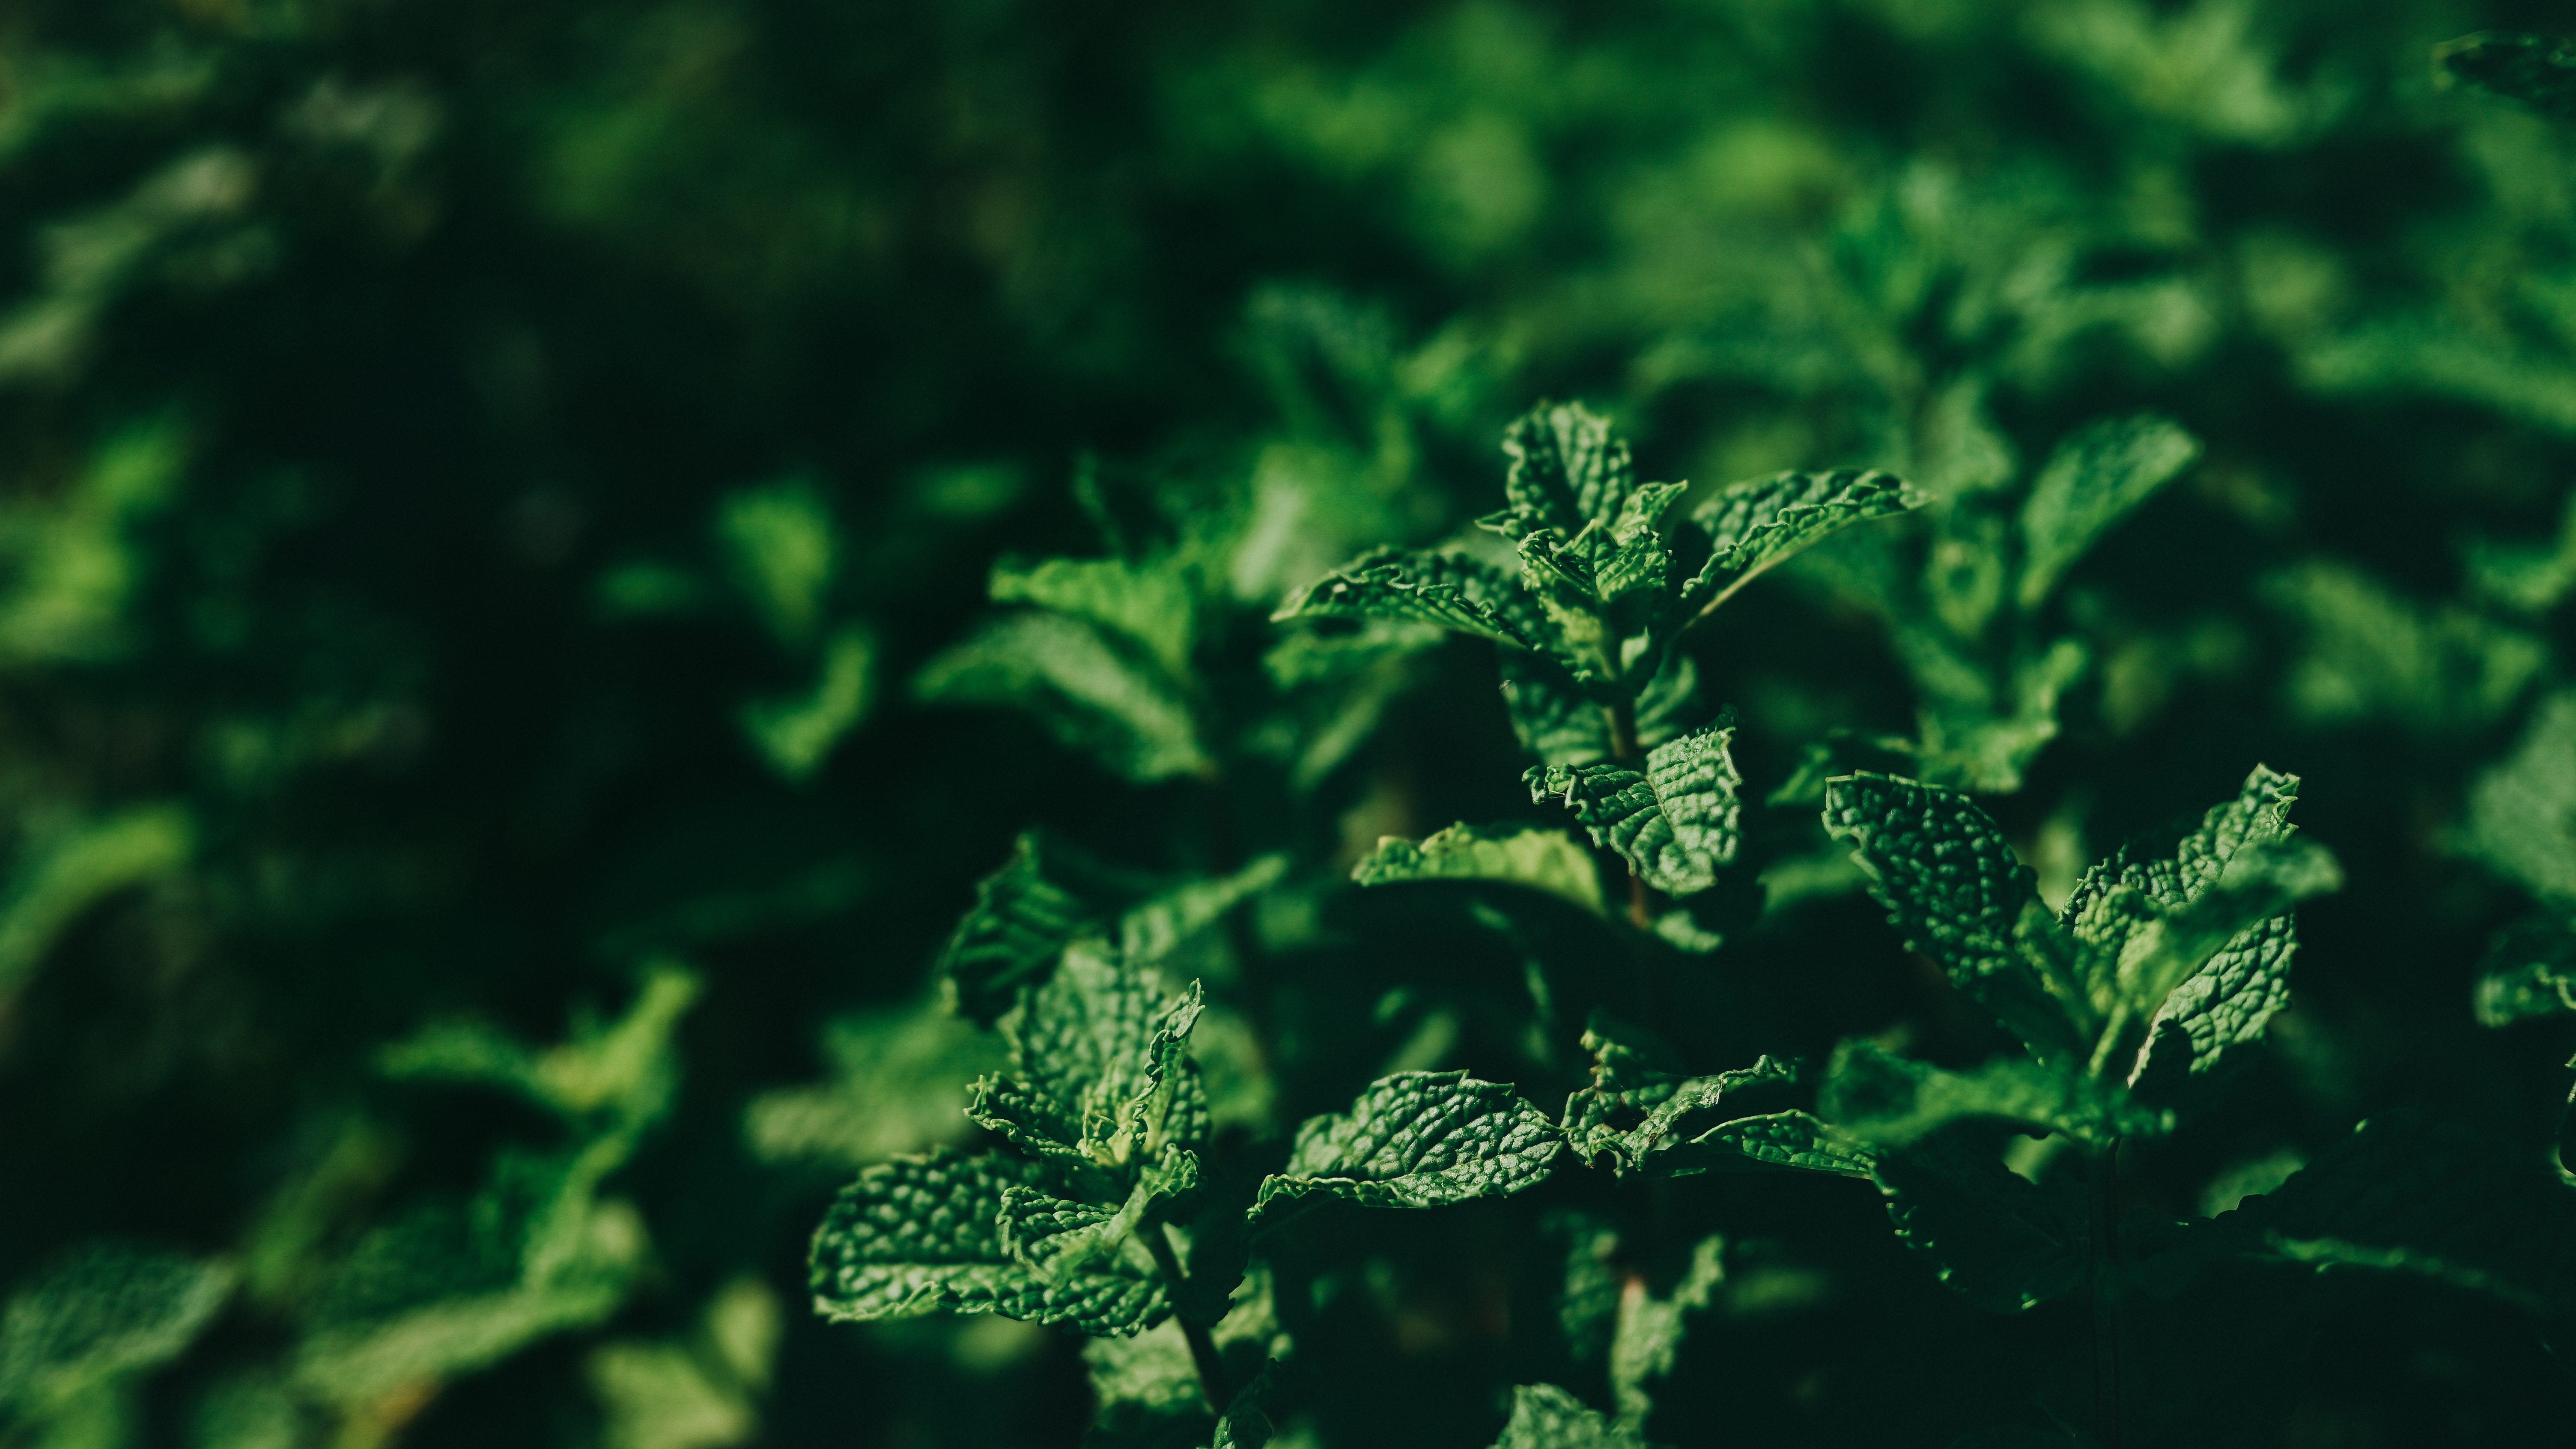 Nature Leaves Plants Mint Leaves Photography Outdoors 6016x3384